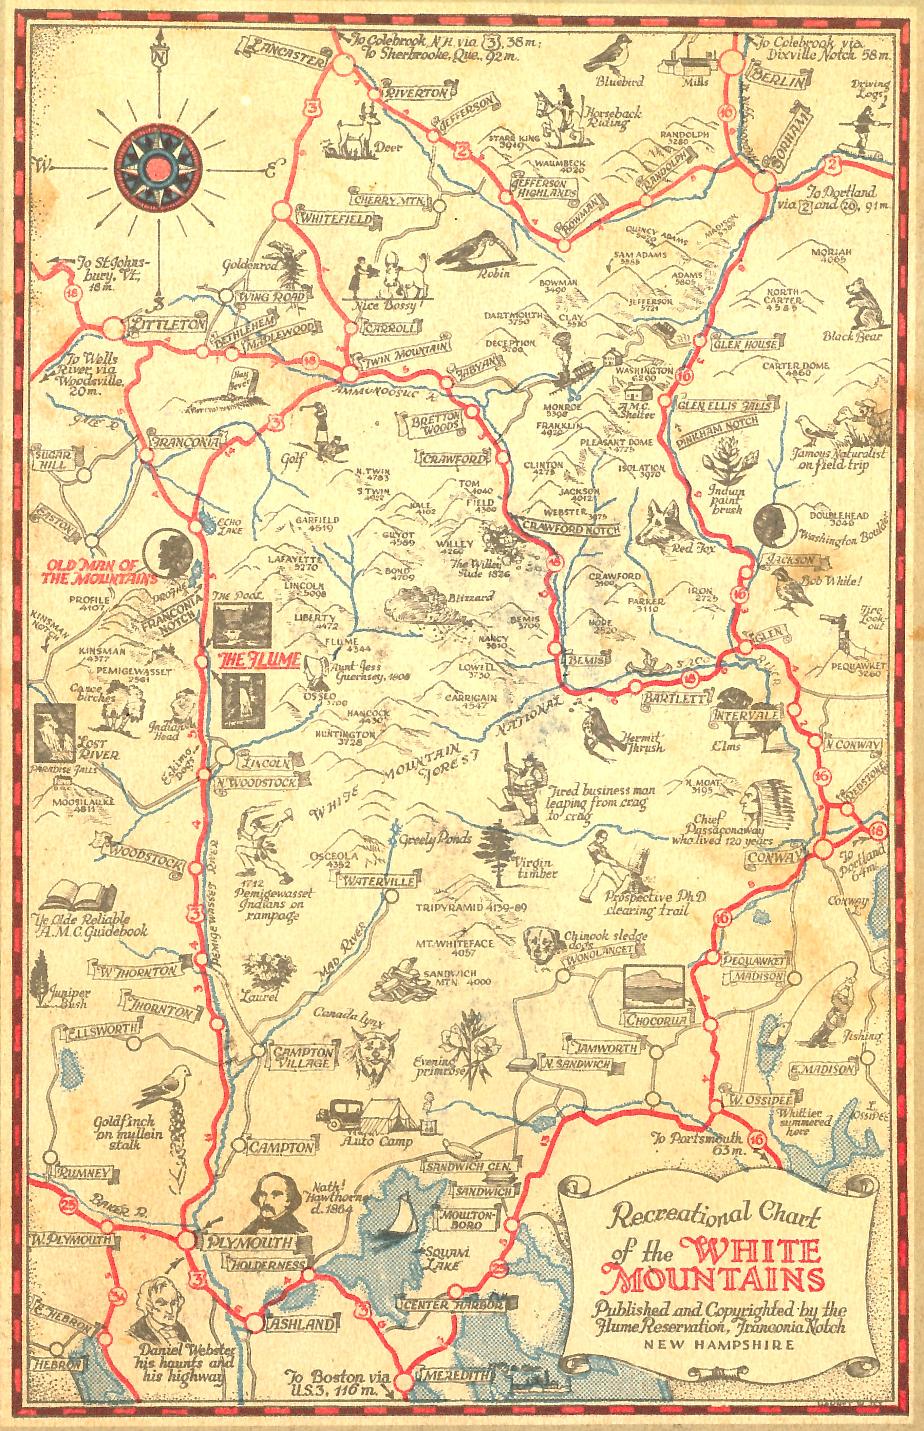 Recreational Map of the White Mountains - 1933